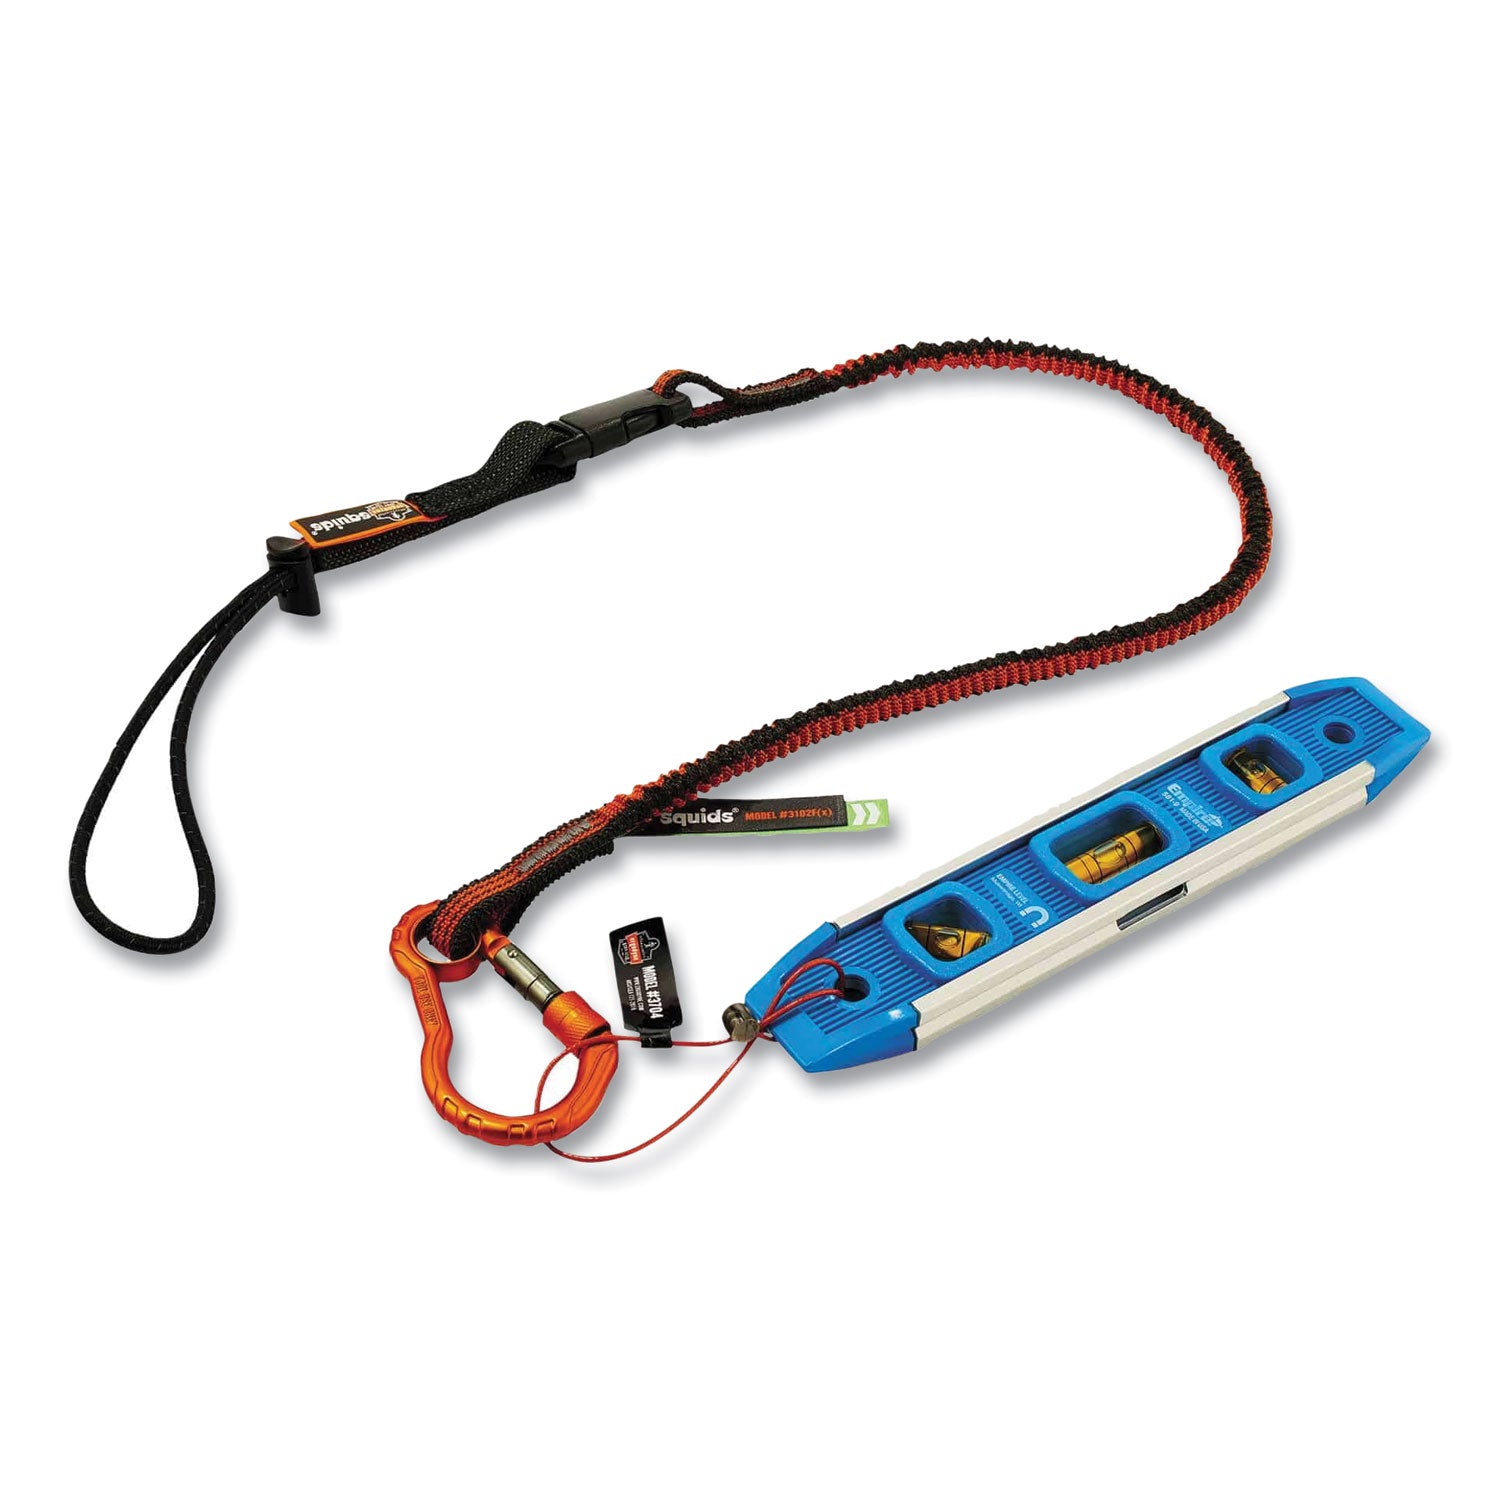 squids-3102fx-tool-lanyard-w-aluminum-carabiner+cinch-loop-5-lb-max-work-cap-38-to-48-or-gyships-in-1-3-business-days_ego19864 - 2